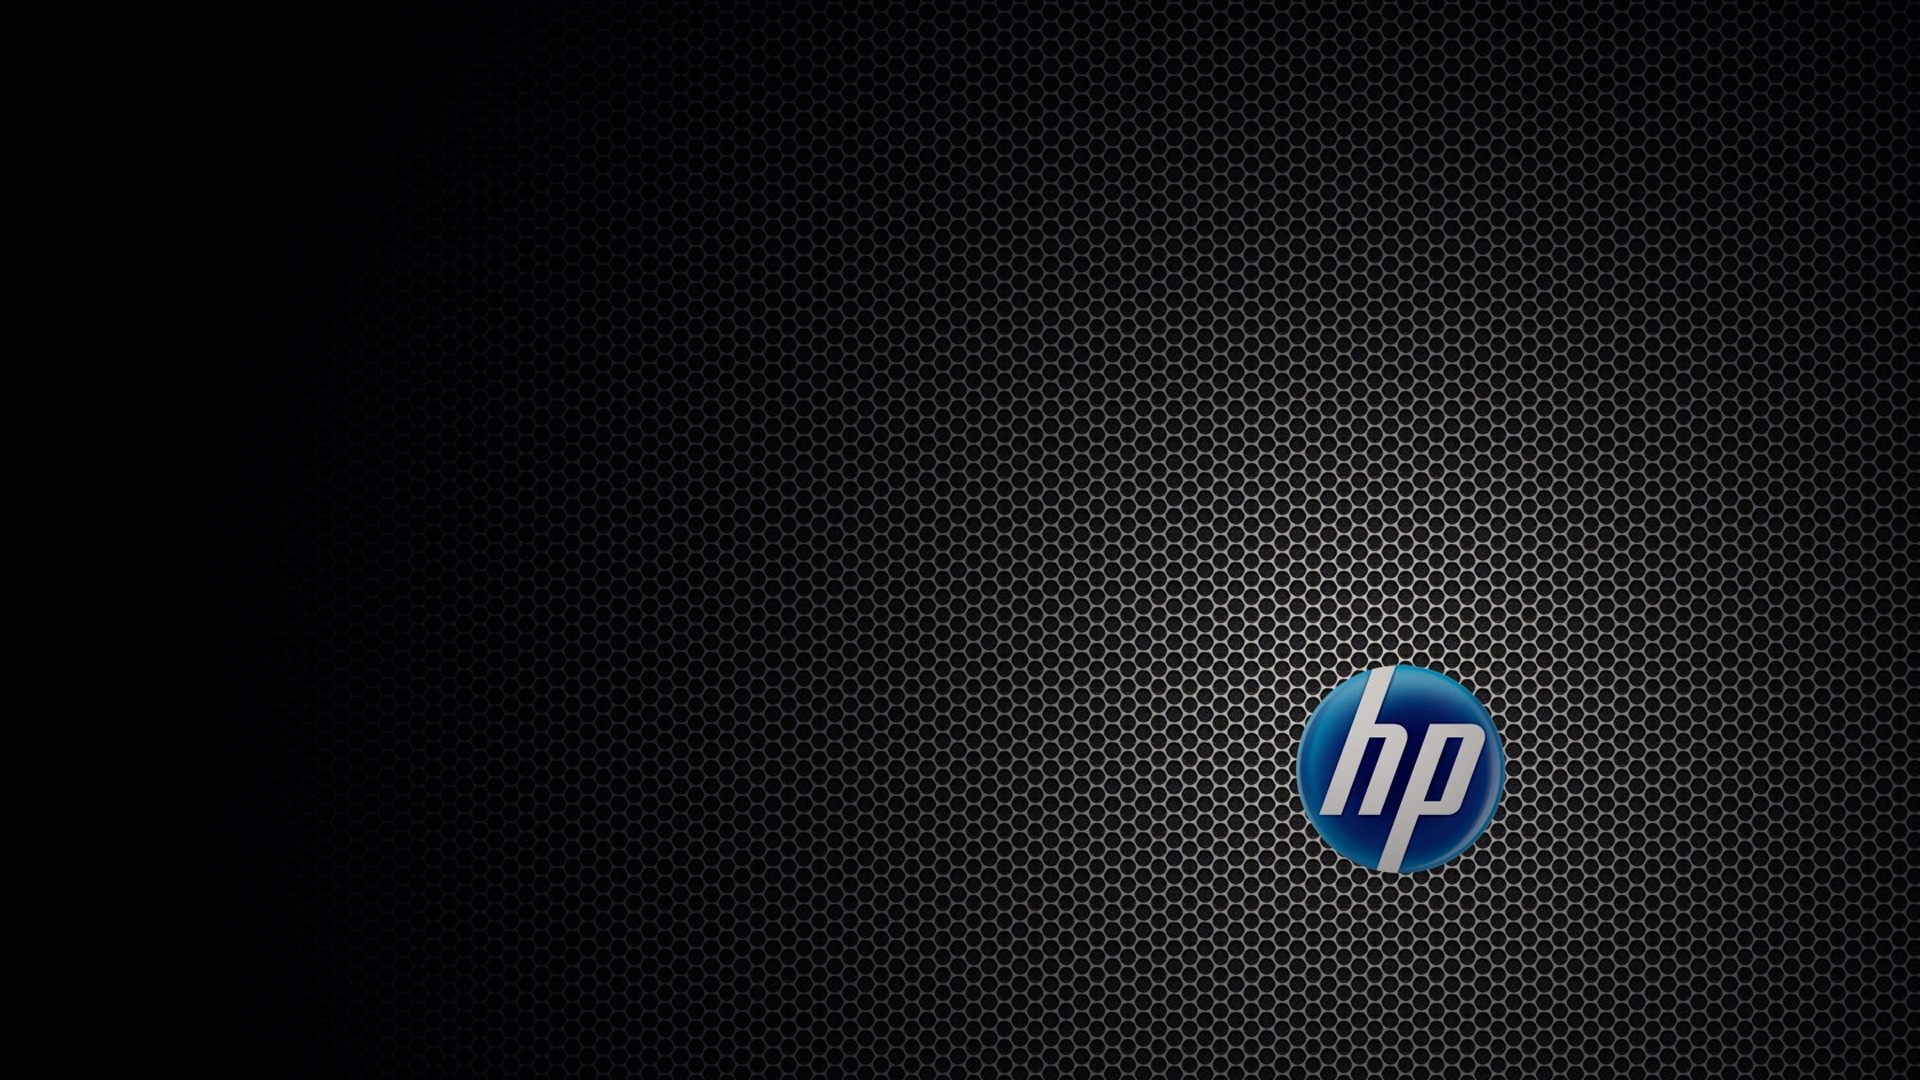 rate select rating give hp computer brand 1 5 give hp computer